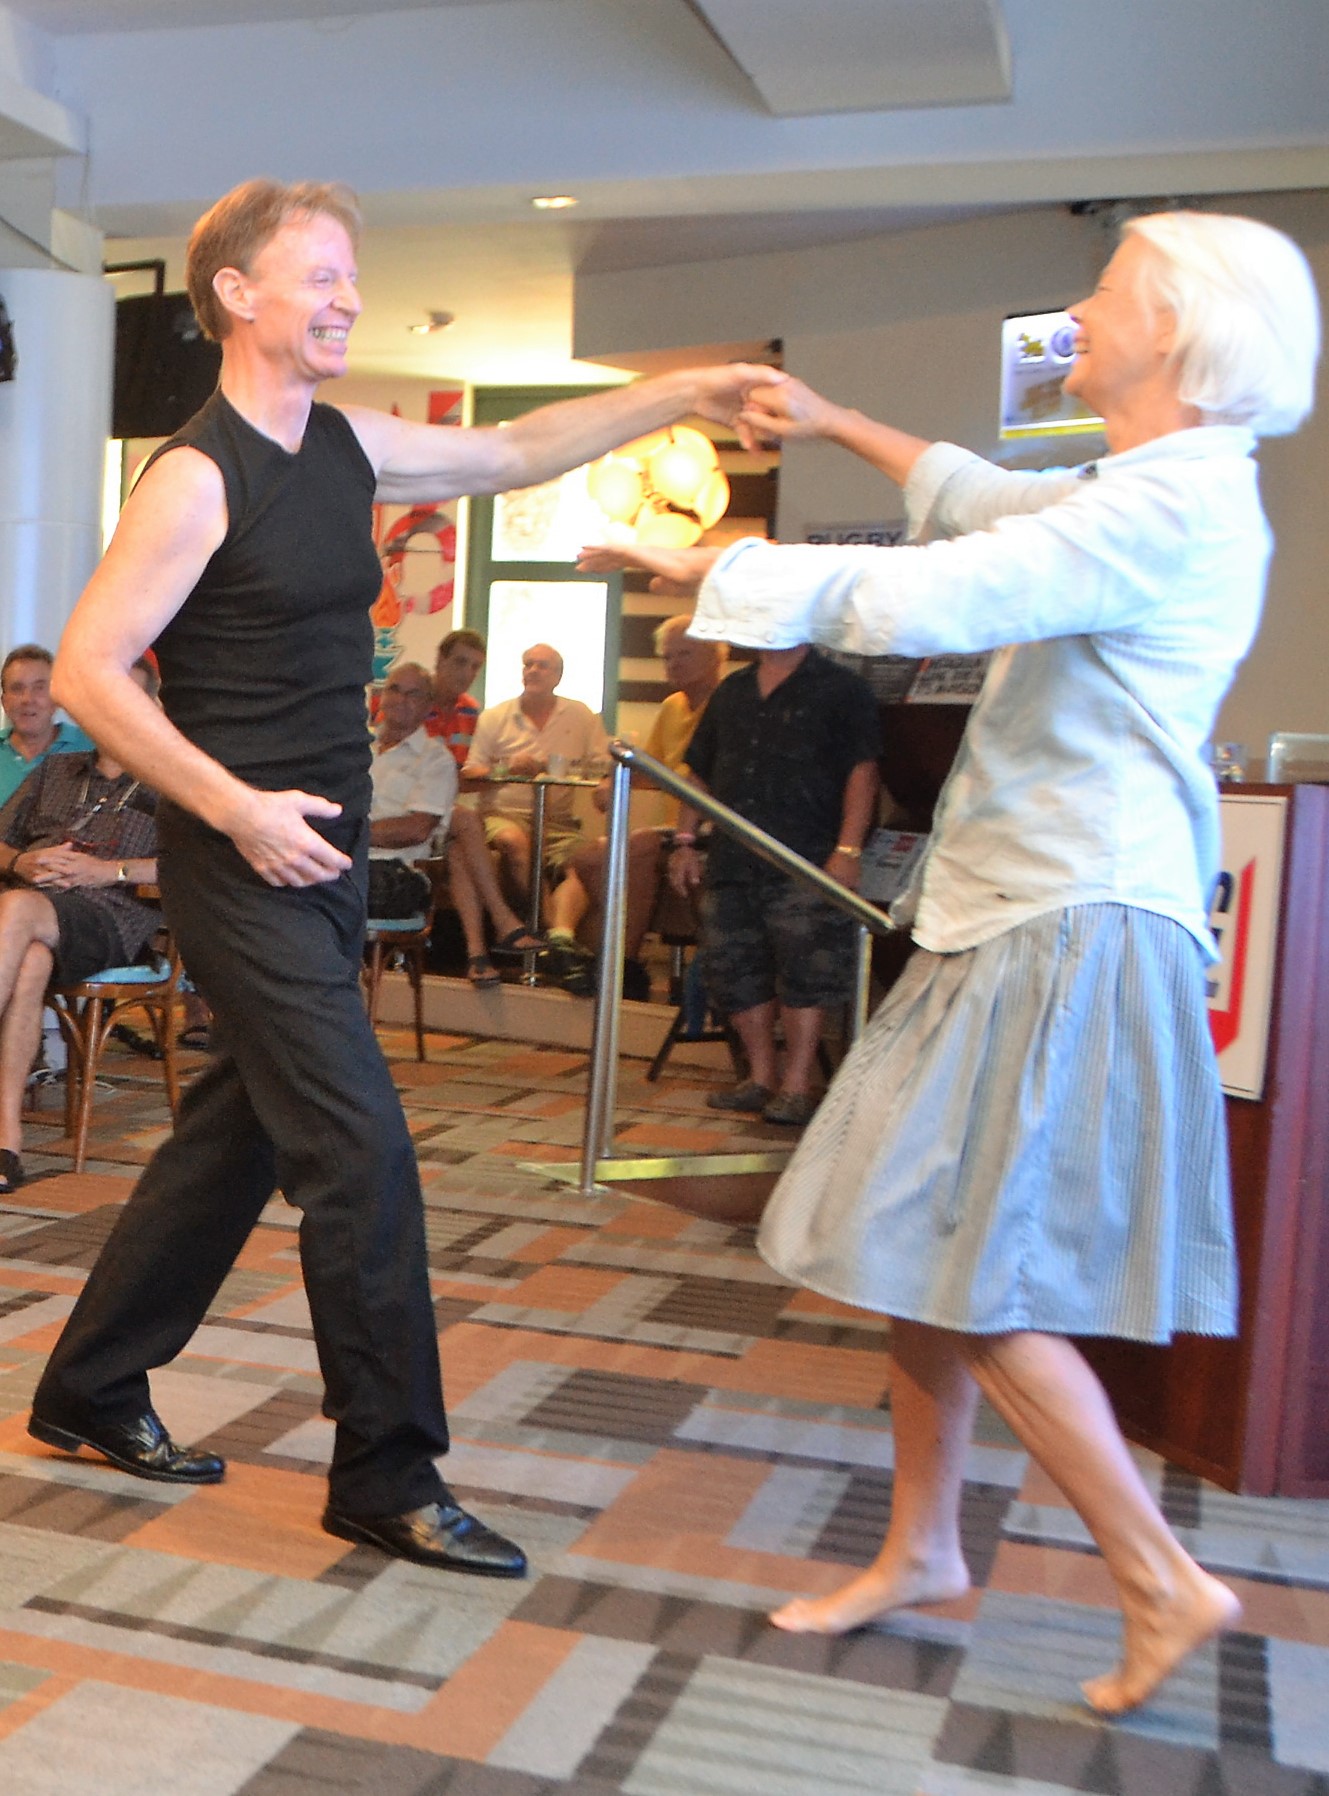 Ren Lexander closed his presentation by asking a woman he didn’t know to come up and dance with him to the tune of Doris Day singing ‘Perhaps Perhaps Perhaps’, he and Arnica performed a charming improvised partner dance.